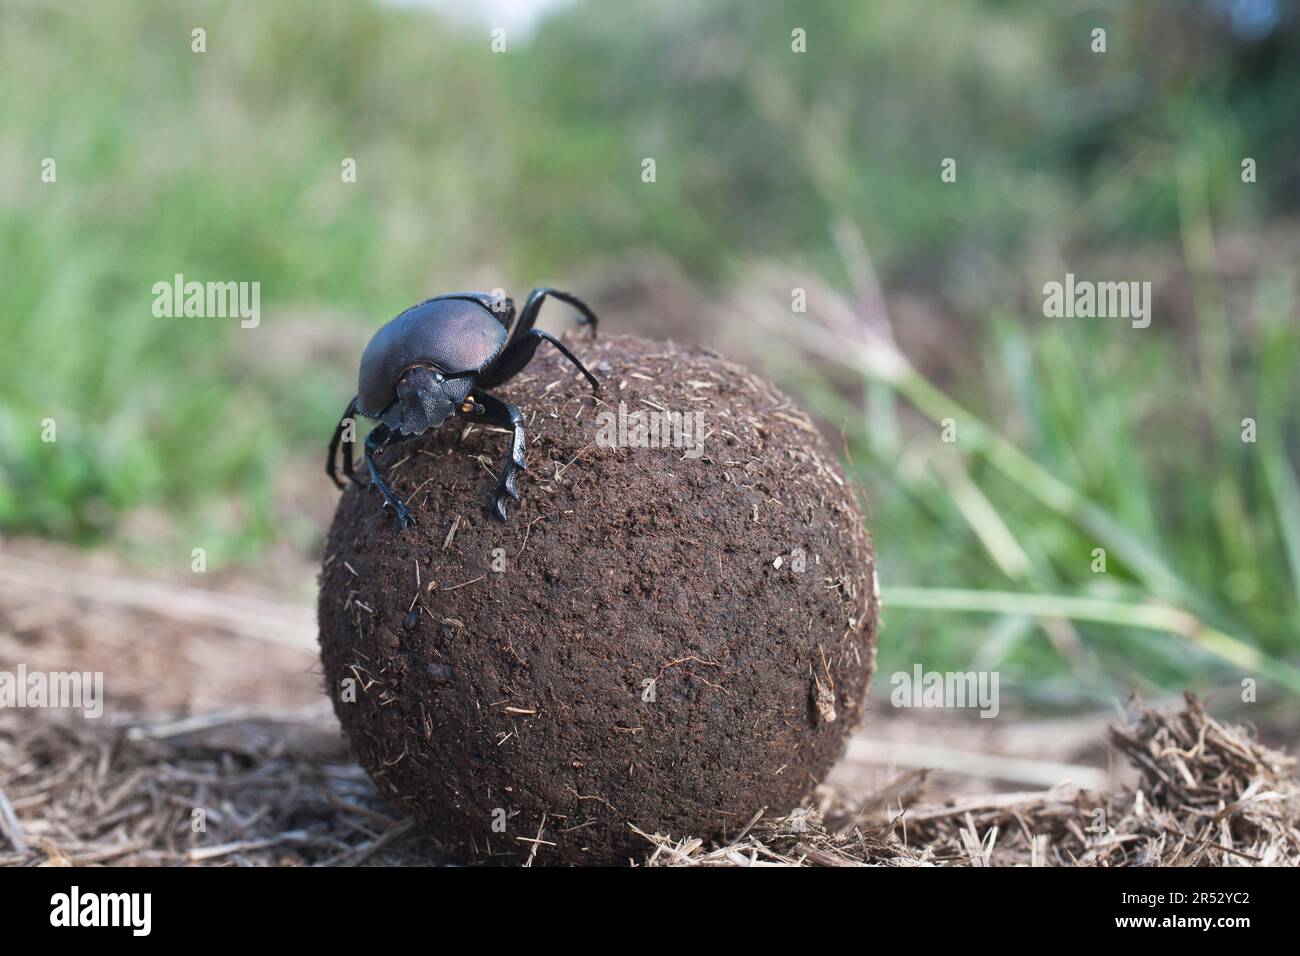 Dung Beetle, rolling ball of dung, Umfolozi-Hluhluwe National Park, South Africa (Scarabaeus) Stock Photo